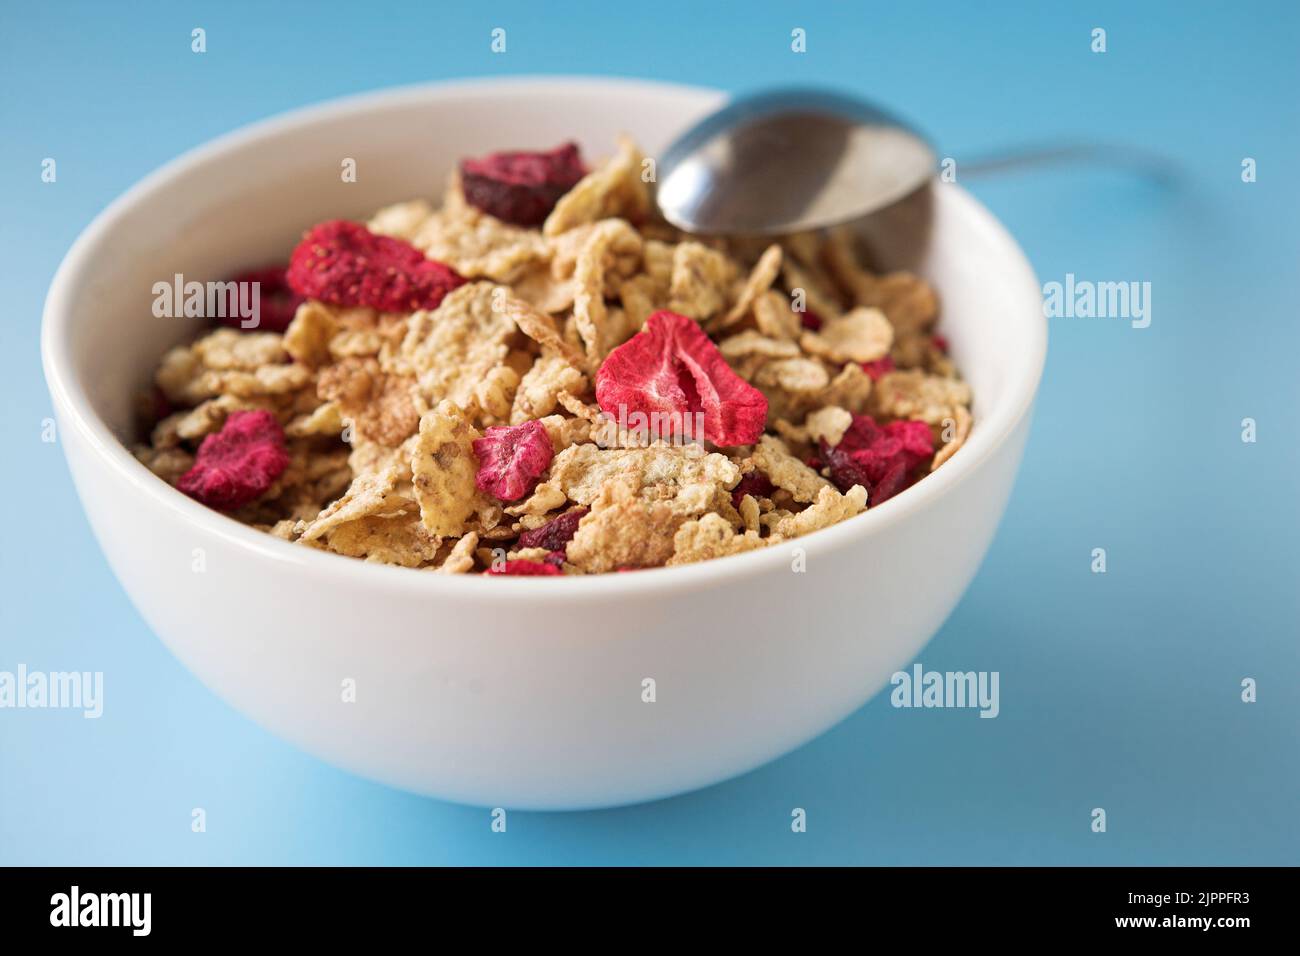 Close up of cereal & fruits on a blue  background - shallow dof Stock Photo